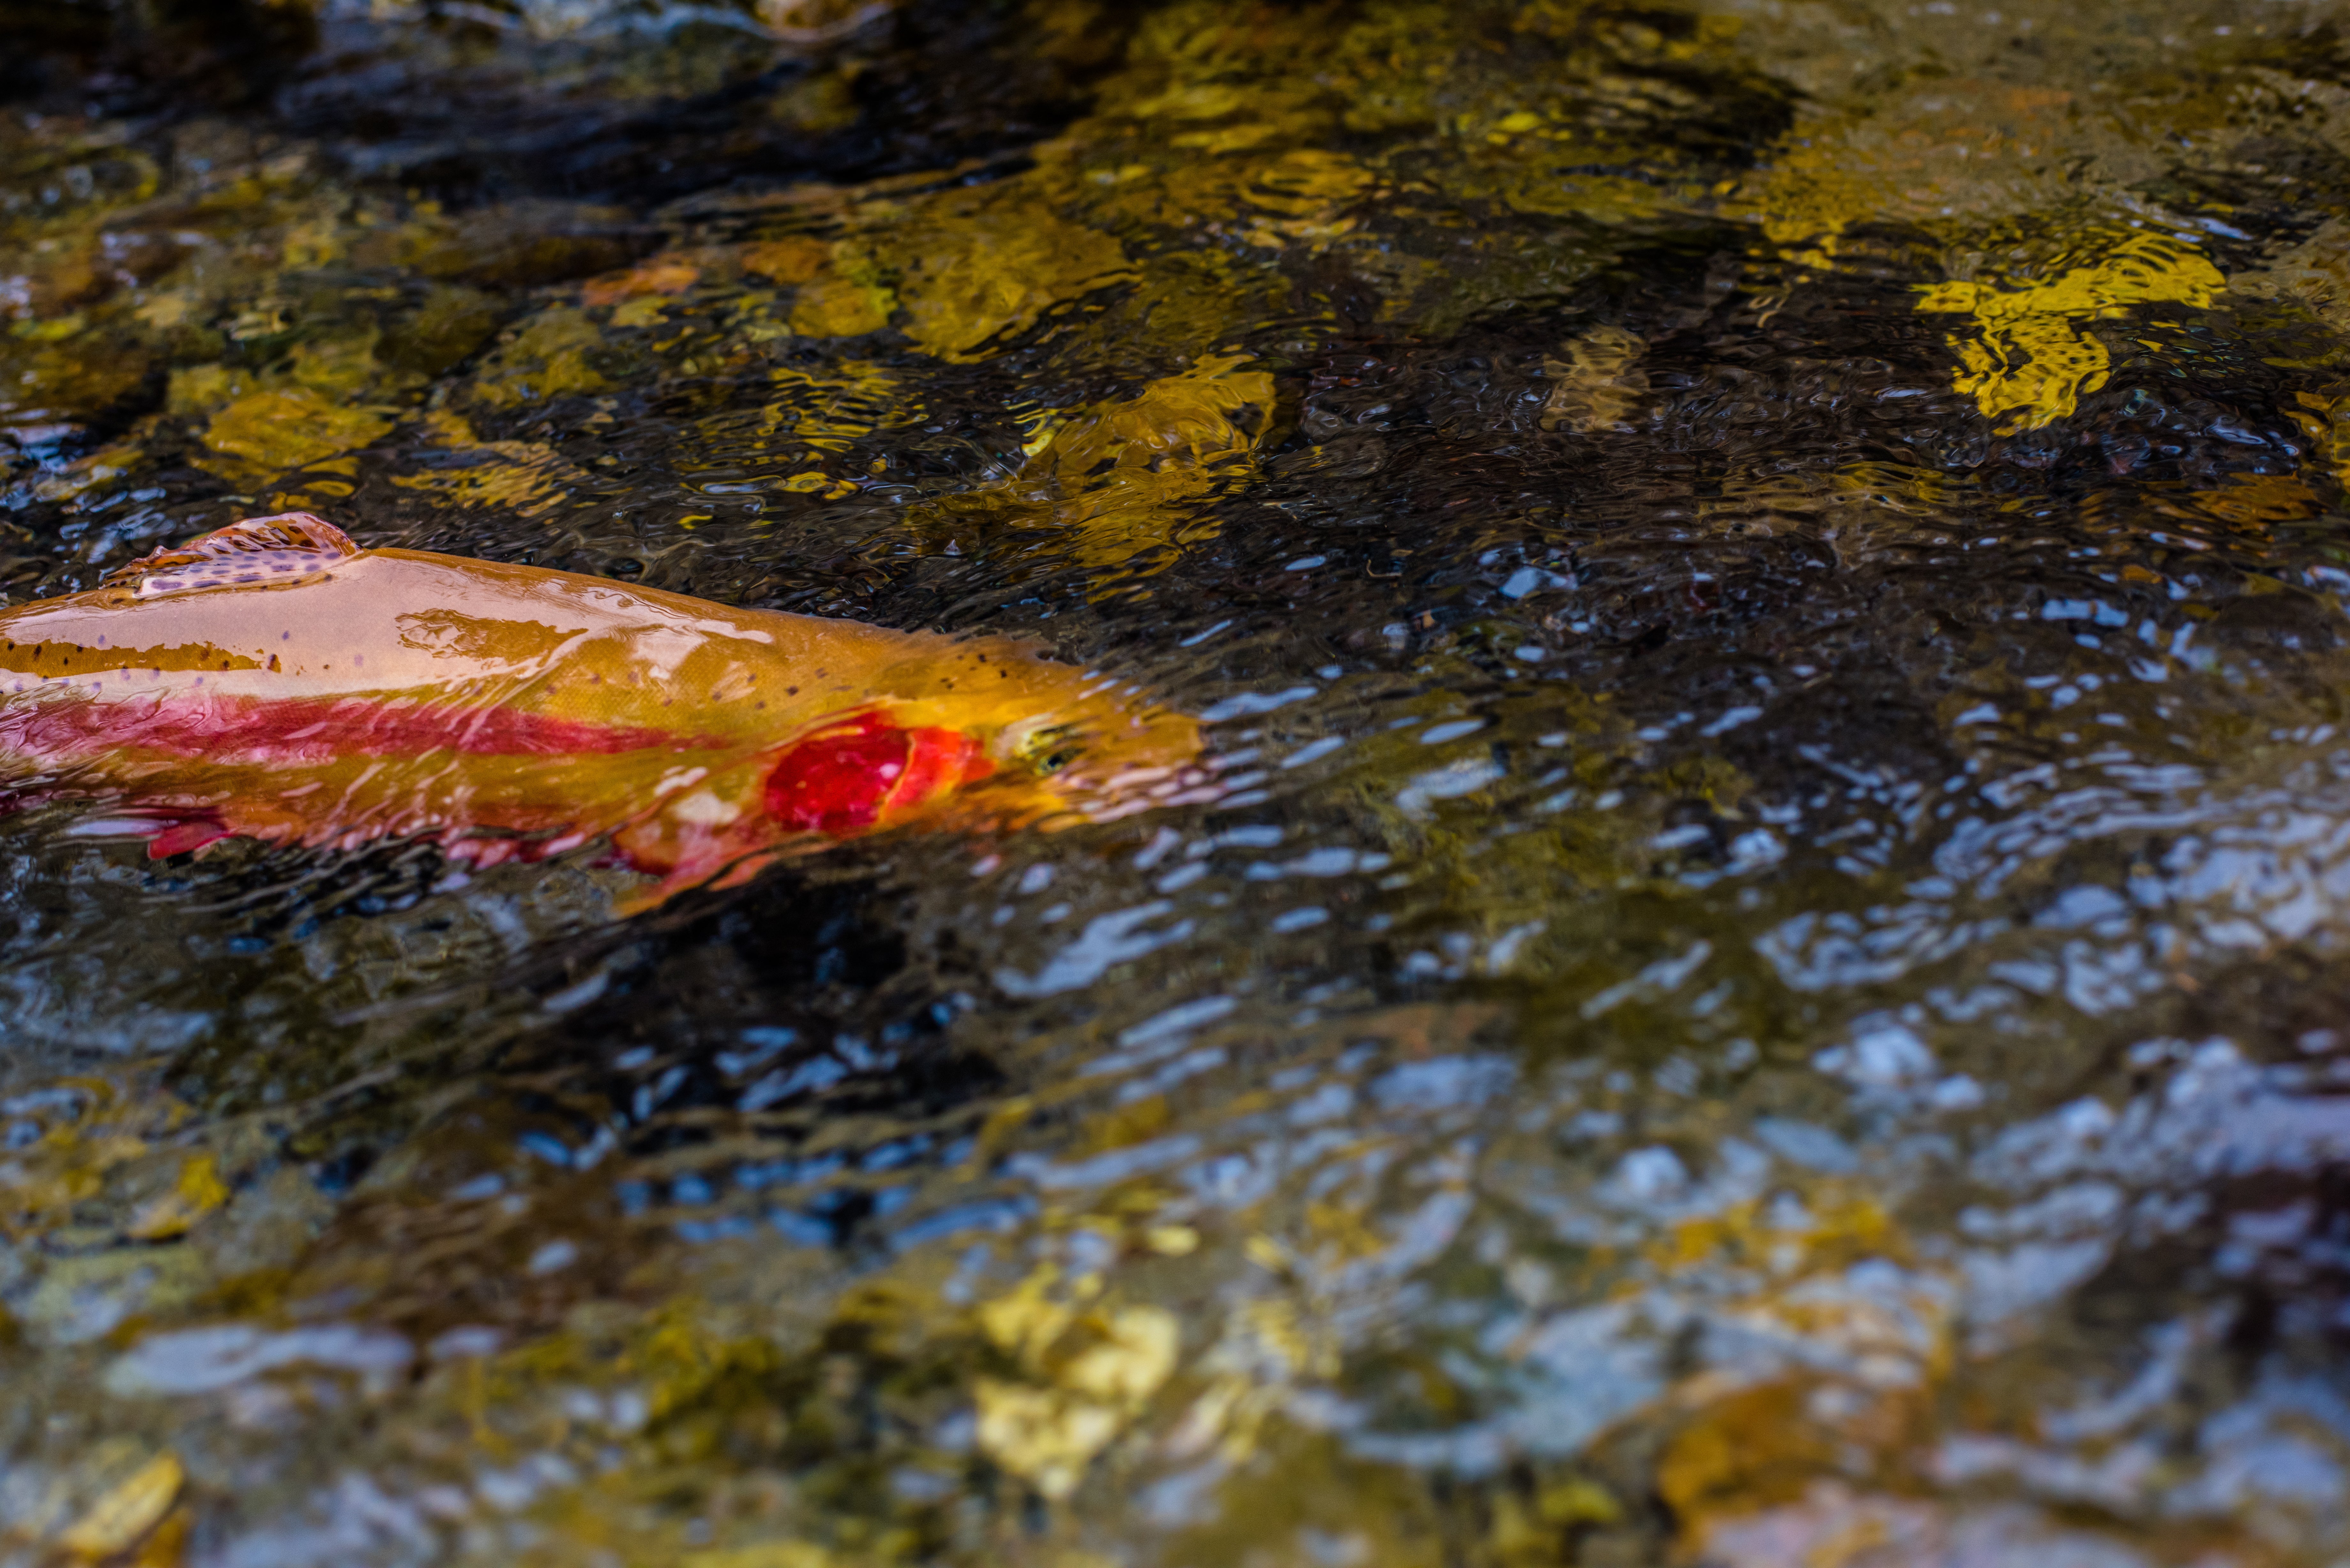 A golden trout in water near Story Fish Hatchery